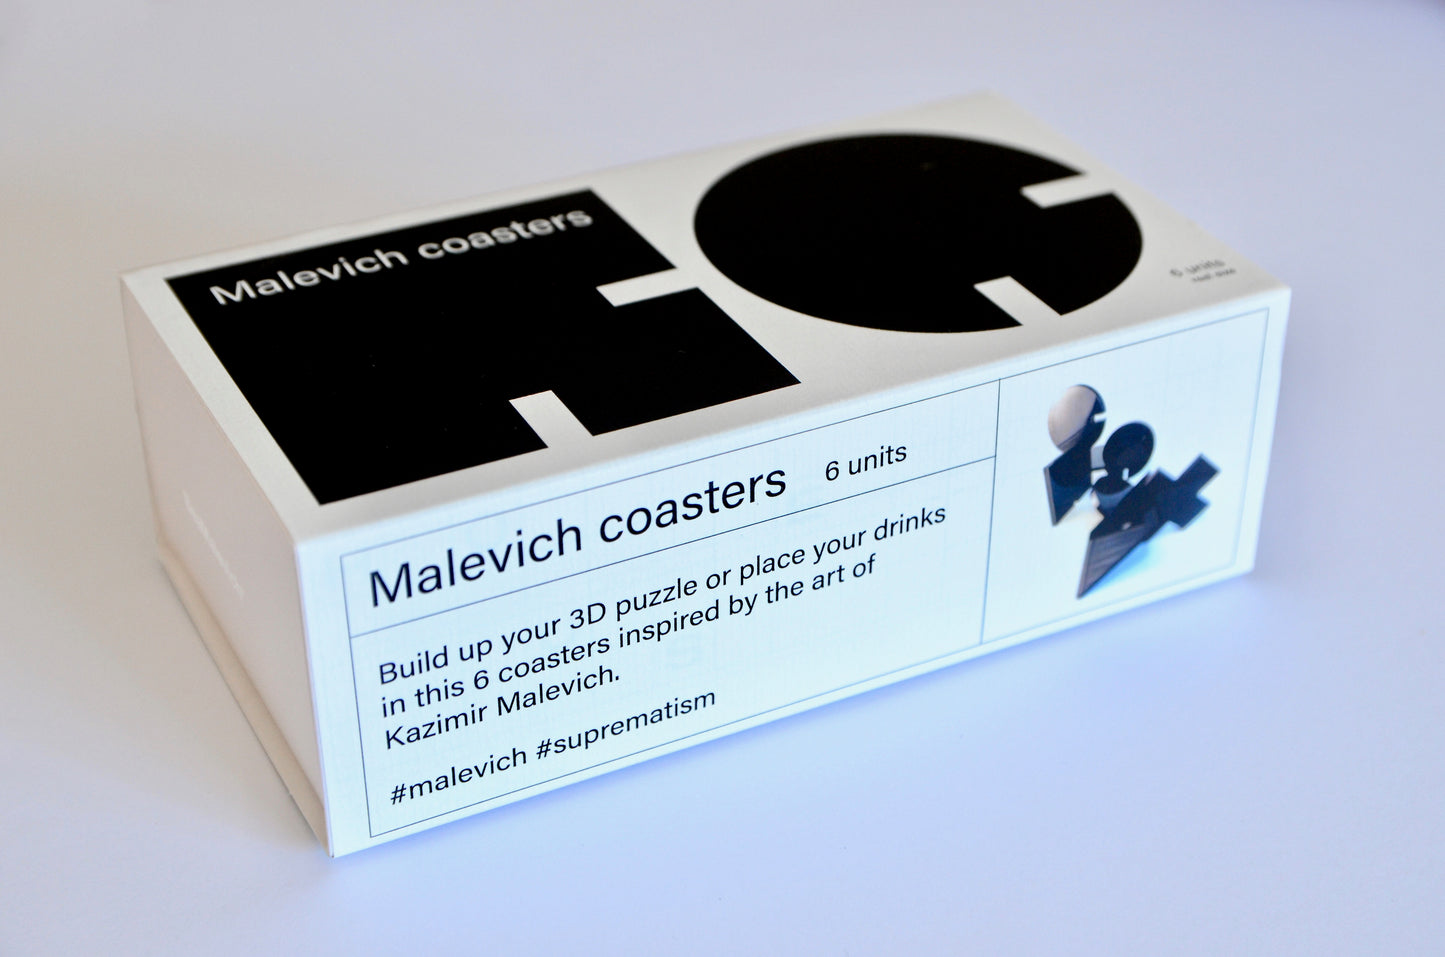 The 6 Malevich Coasters